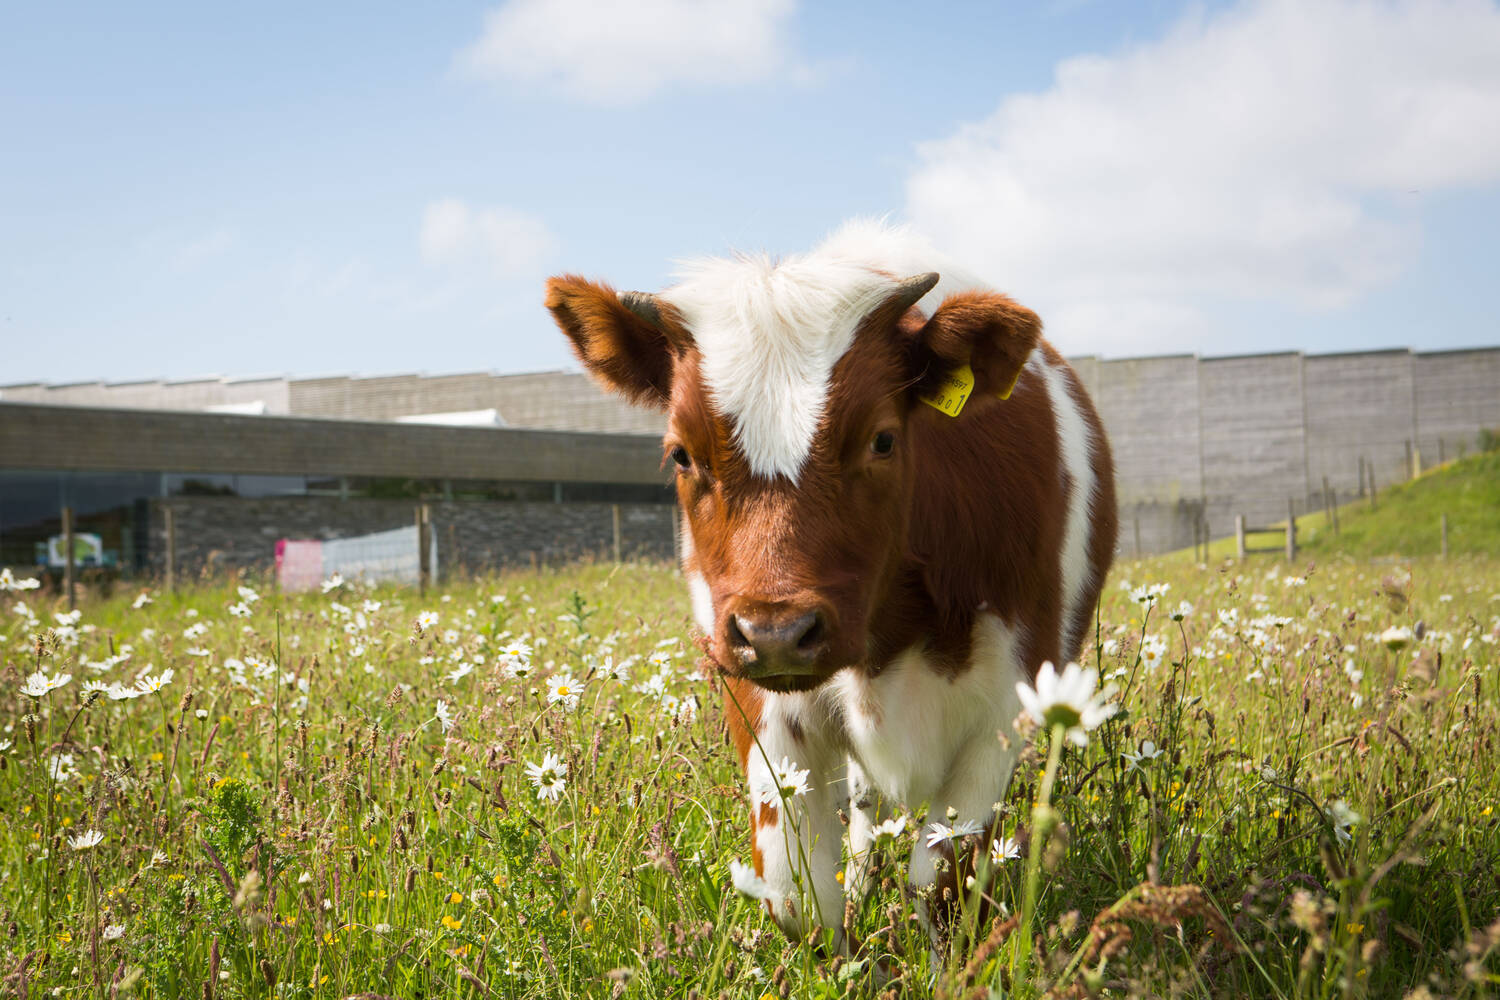 A Shetland calf is standing in a meadow, with Culloden Visitor Centre in the background.